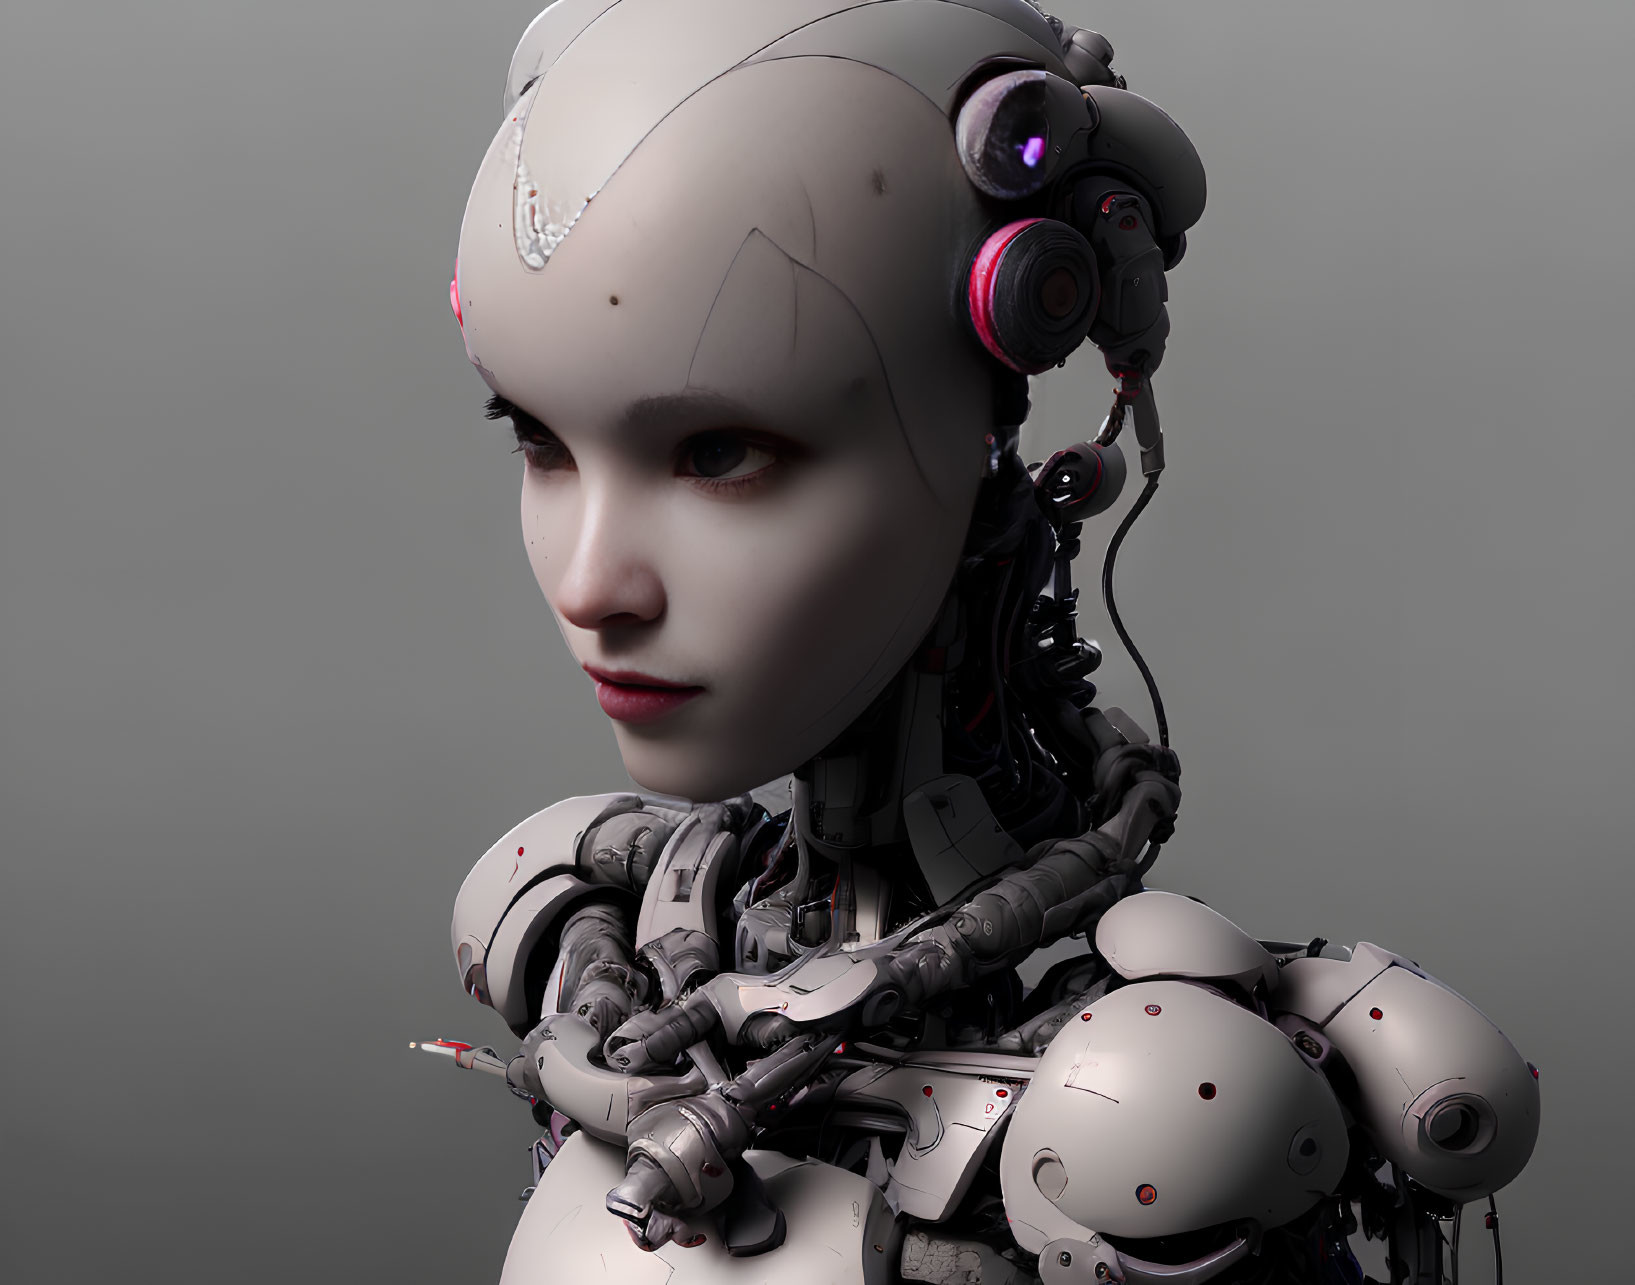 Detailed Female Android with Human-Like Face and Mechanical Body